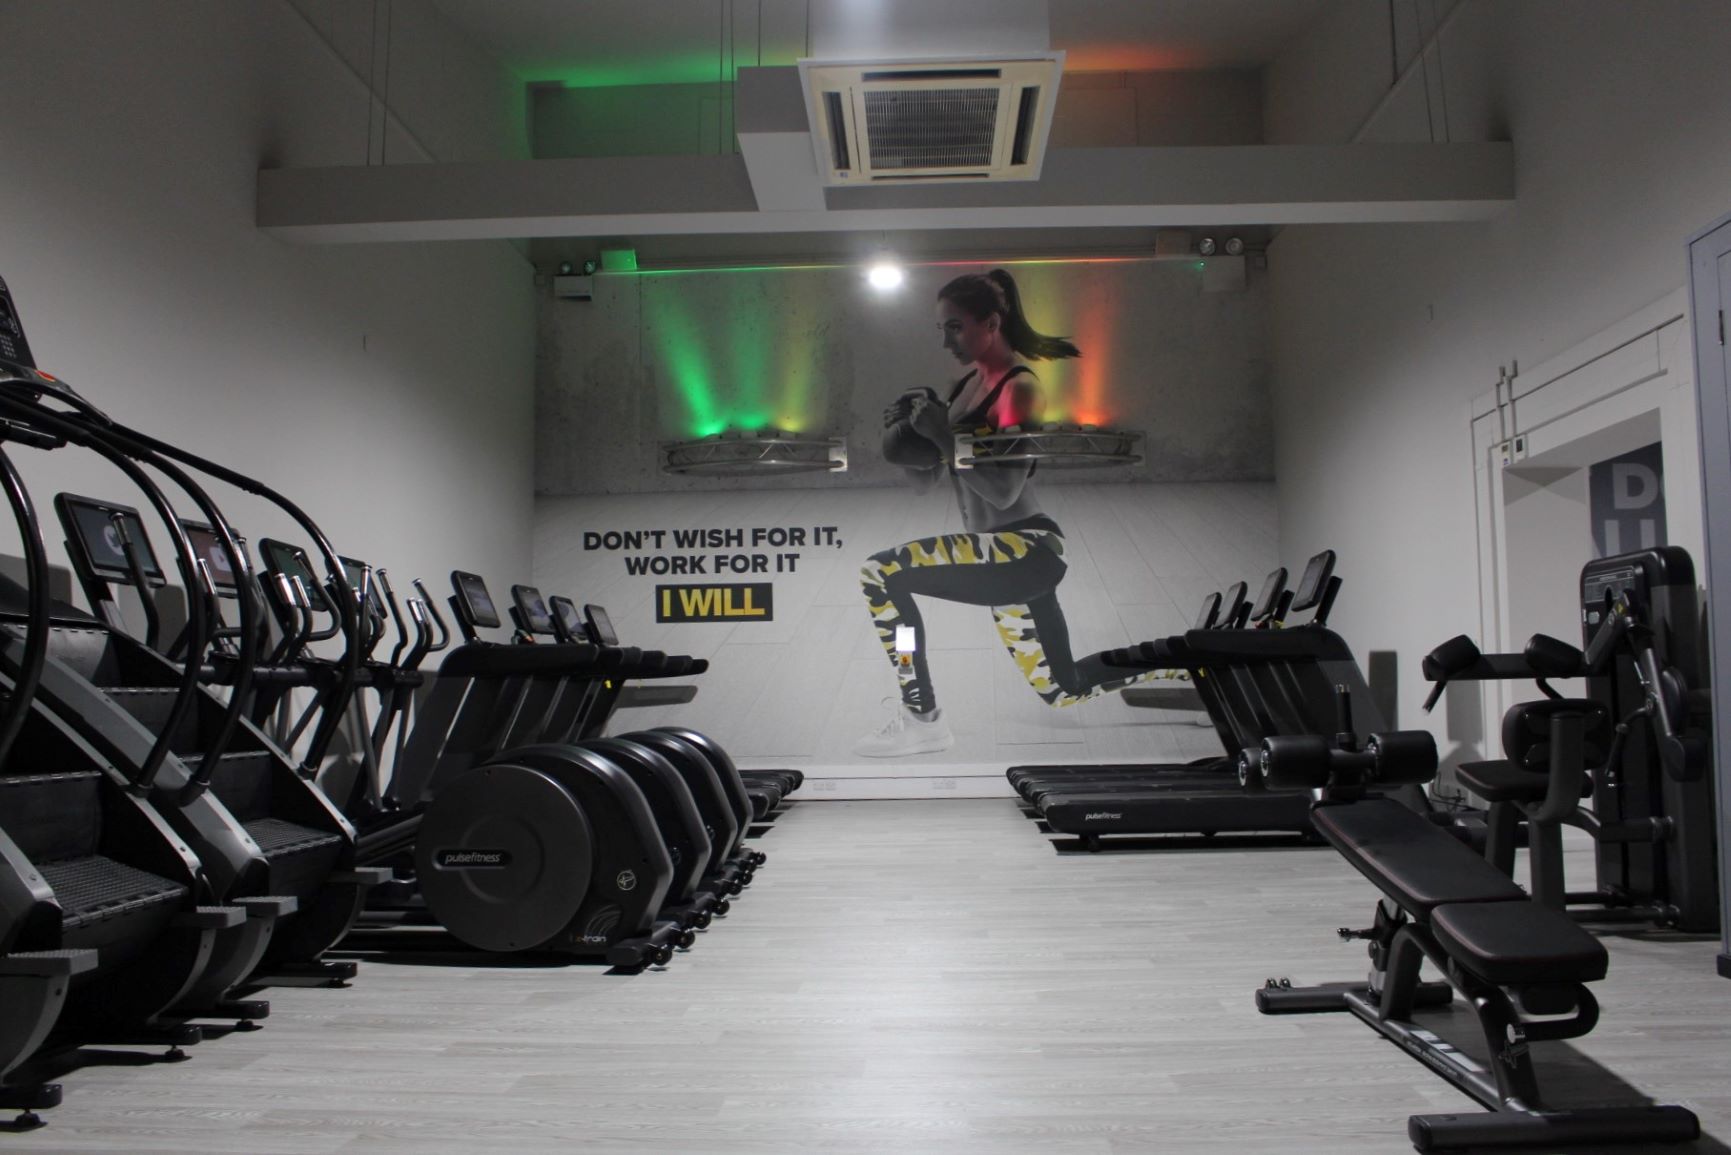 Redhill Gym new equipment including treadmills and cross trainers